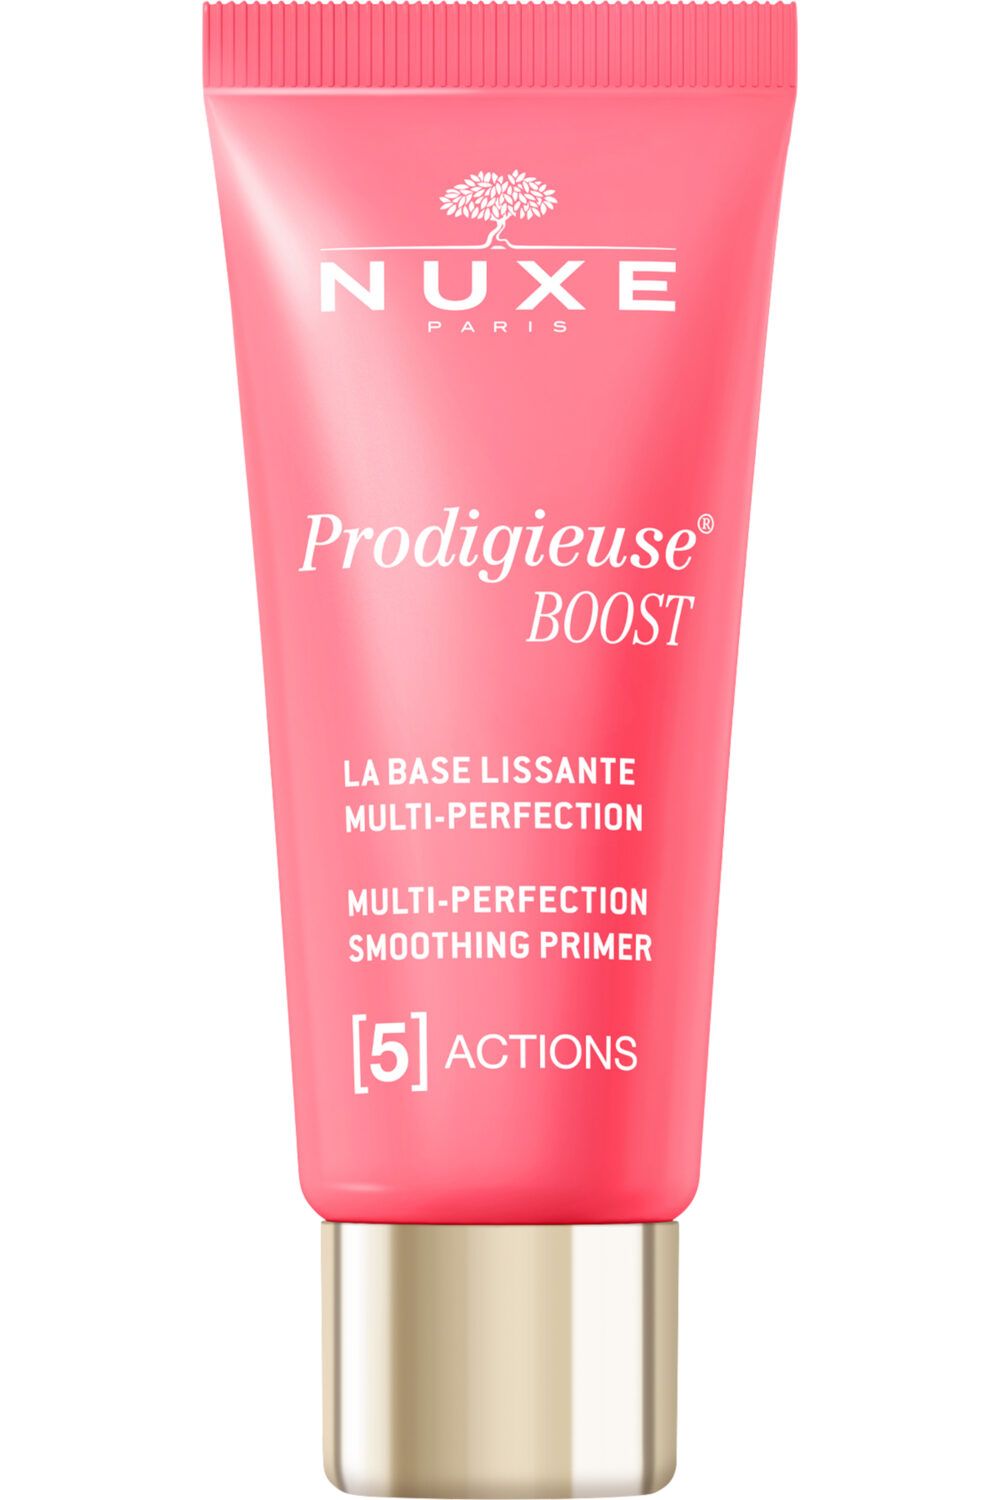 Nuxe - Base Lissante Multi-Perfection Prodigieuse® Boost